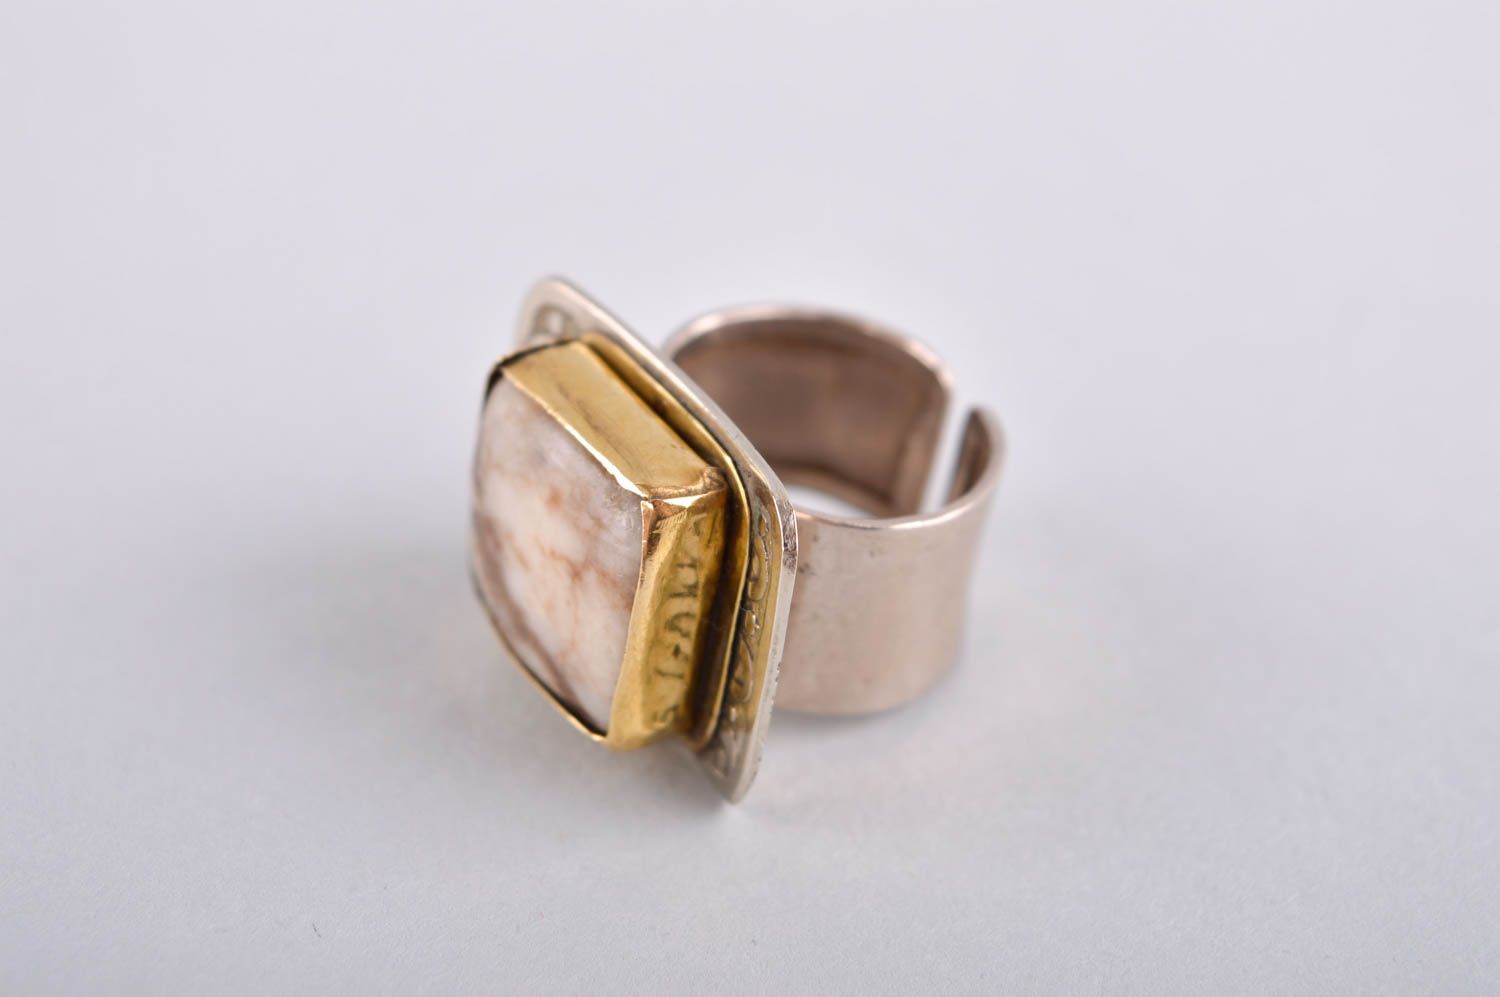 Designer ring unusual gift for women metal accessory brass ring gift ideas photo 2